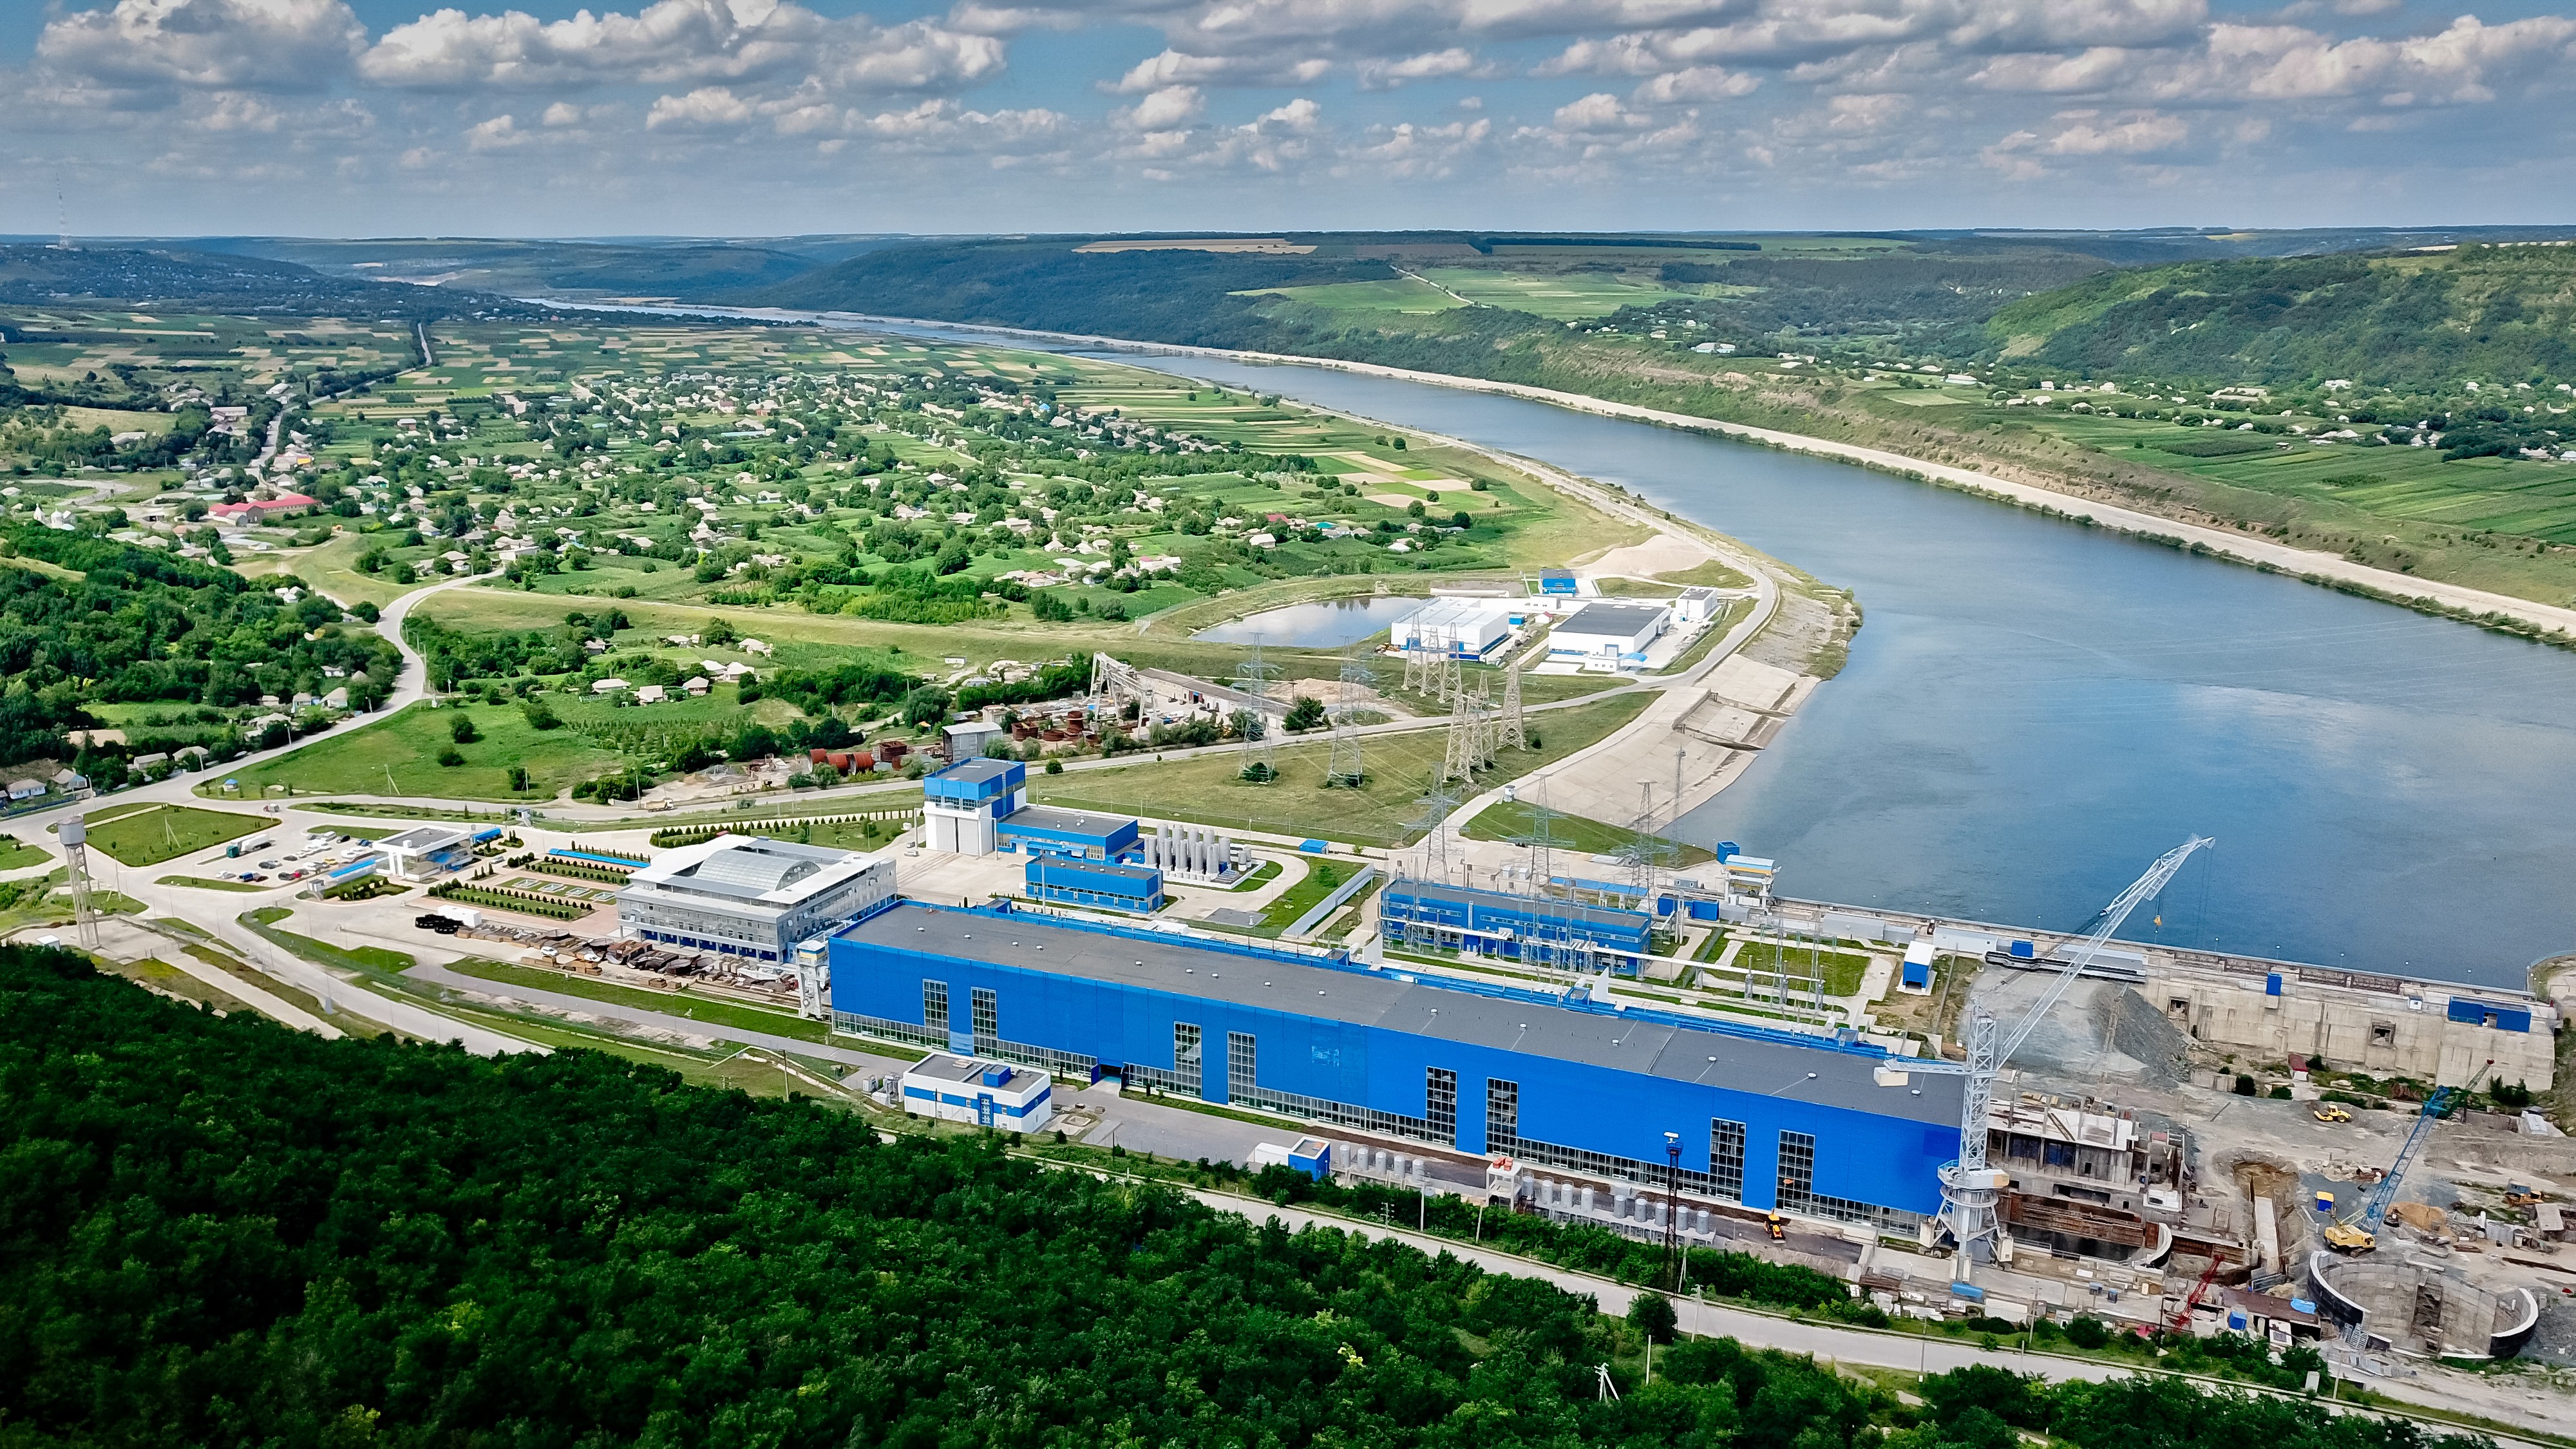 The EBRD and the Government of Italy will provide 200 million euros for the restoration of hydropower stations in Ukraine